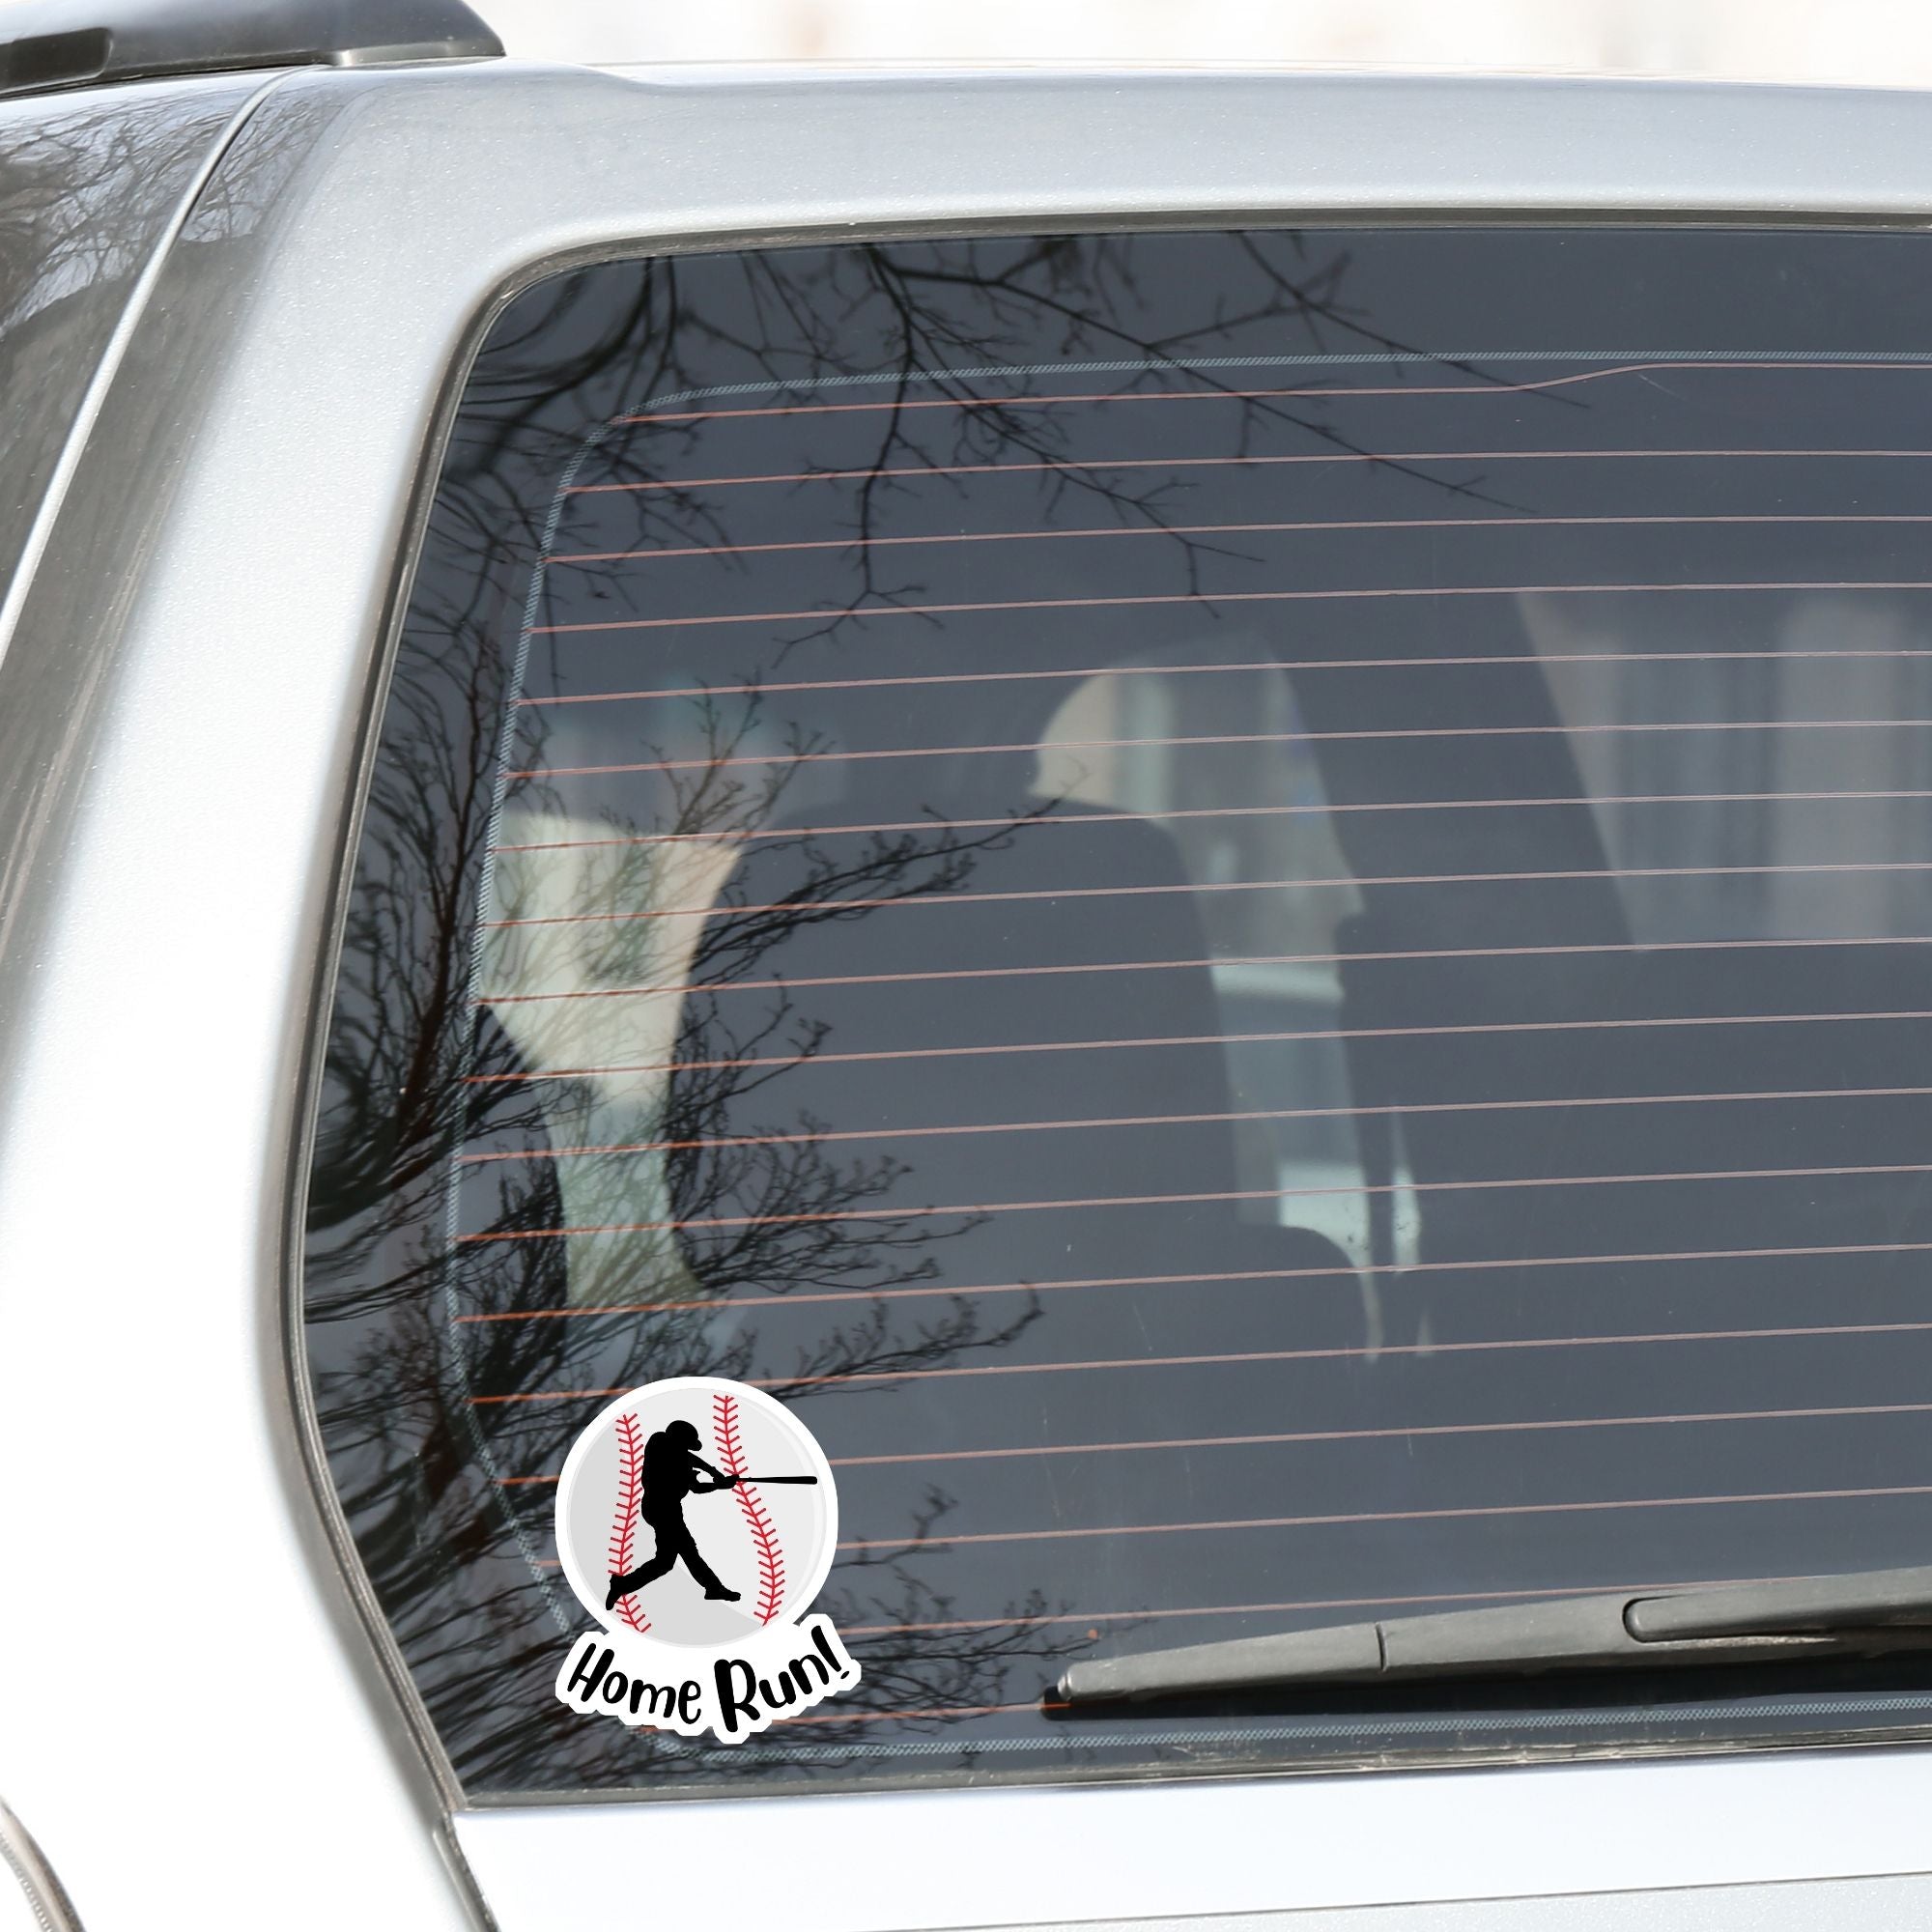 Knock it out of the park! This individual die-cut sticker features the silhouette of a baseball player swinging a bat, on a background of a baseball, with the word "Homerun!" below. This image shows the baseball sticker on the rear window of a car.